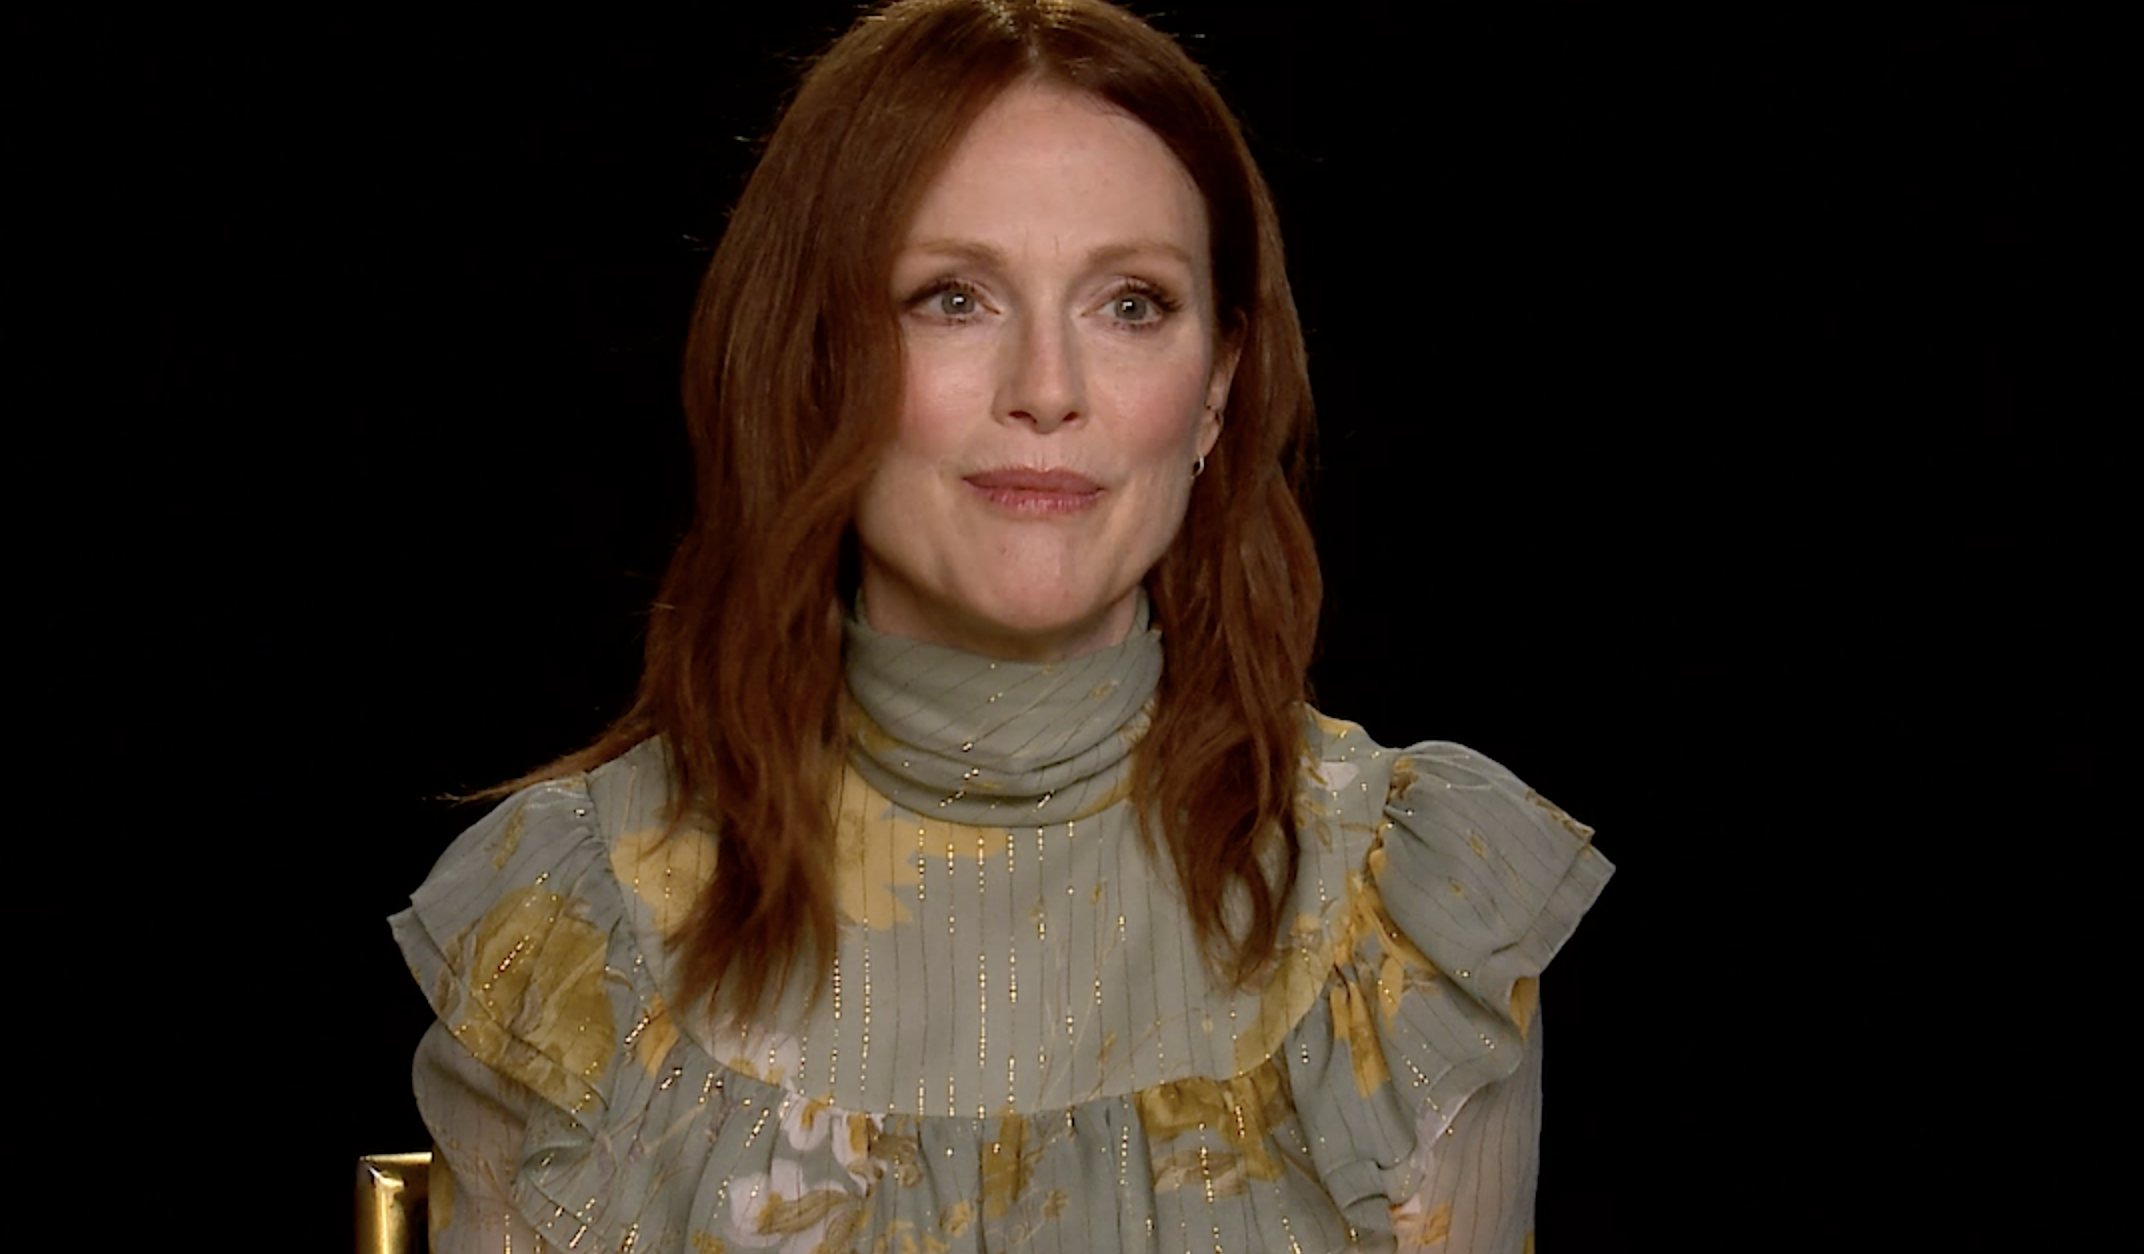 Role Recall Julianne Moore On Starting In Soap Operas Working While